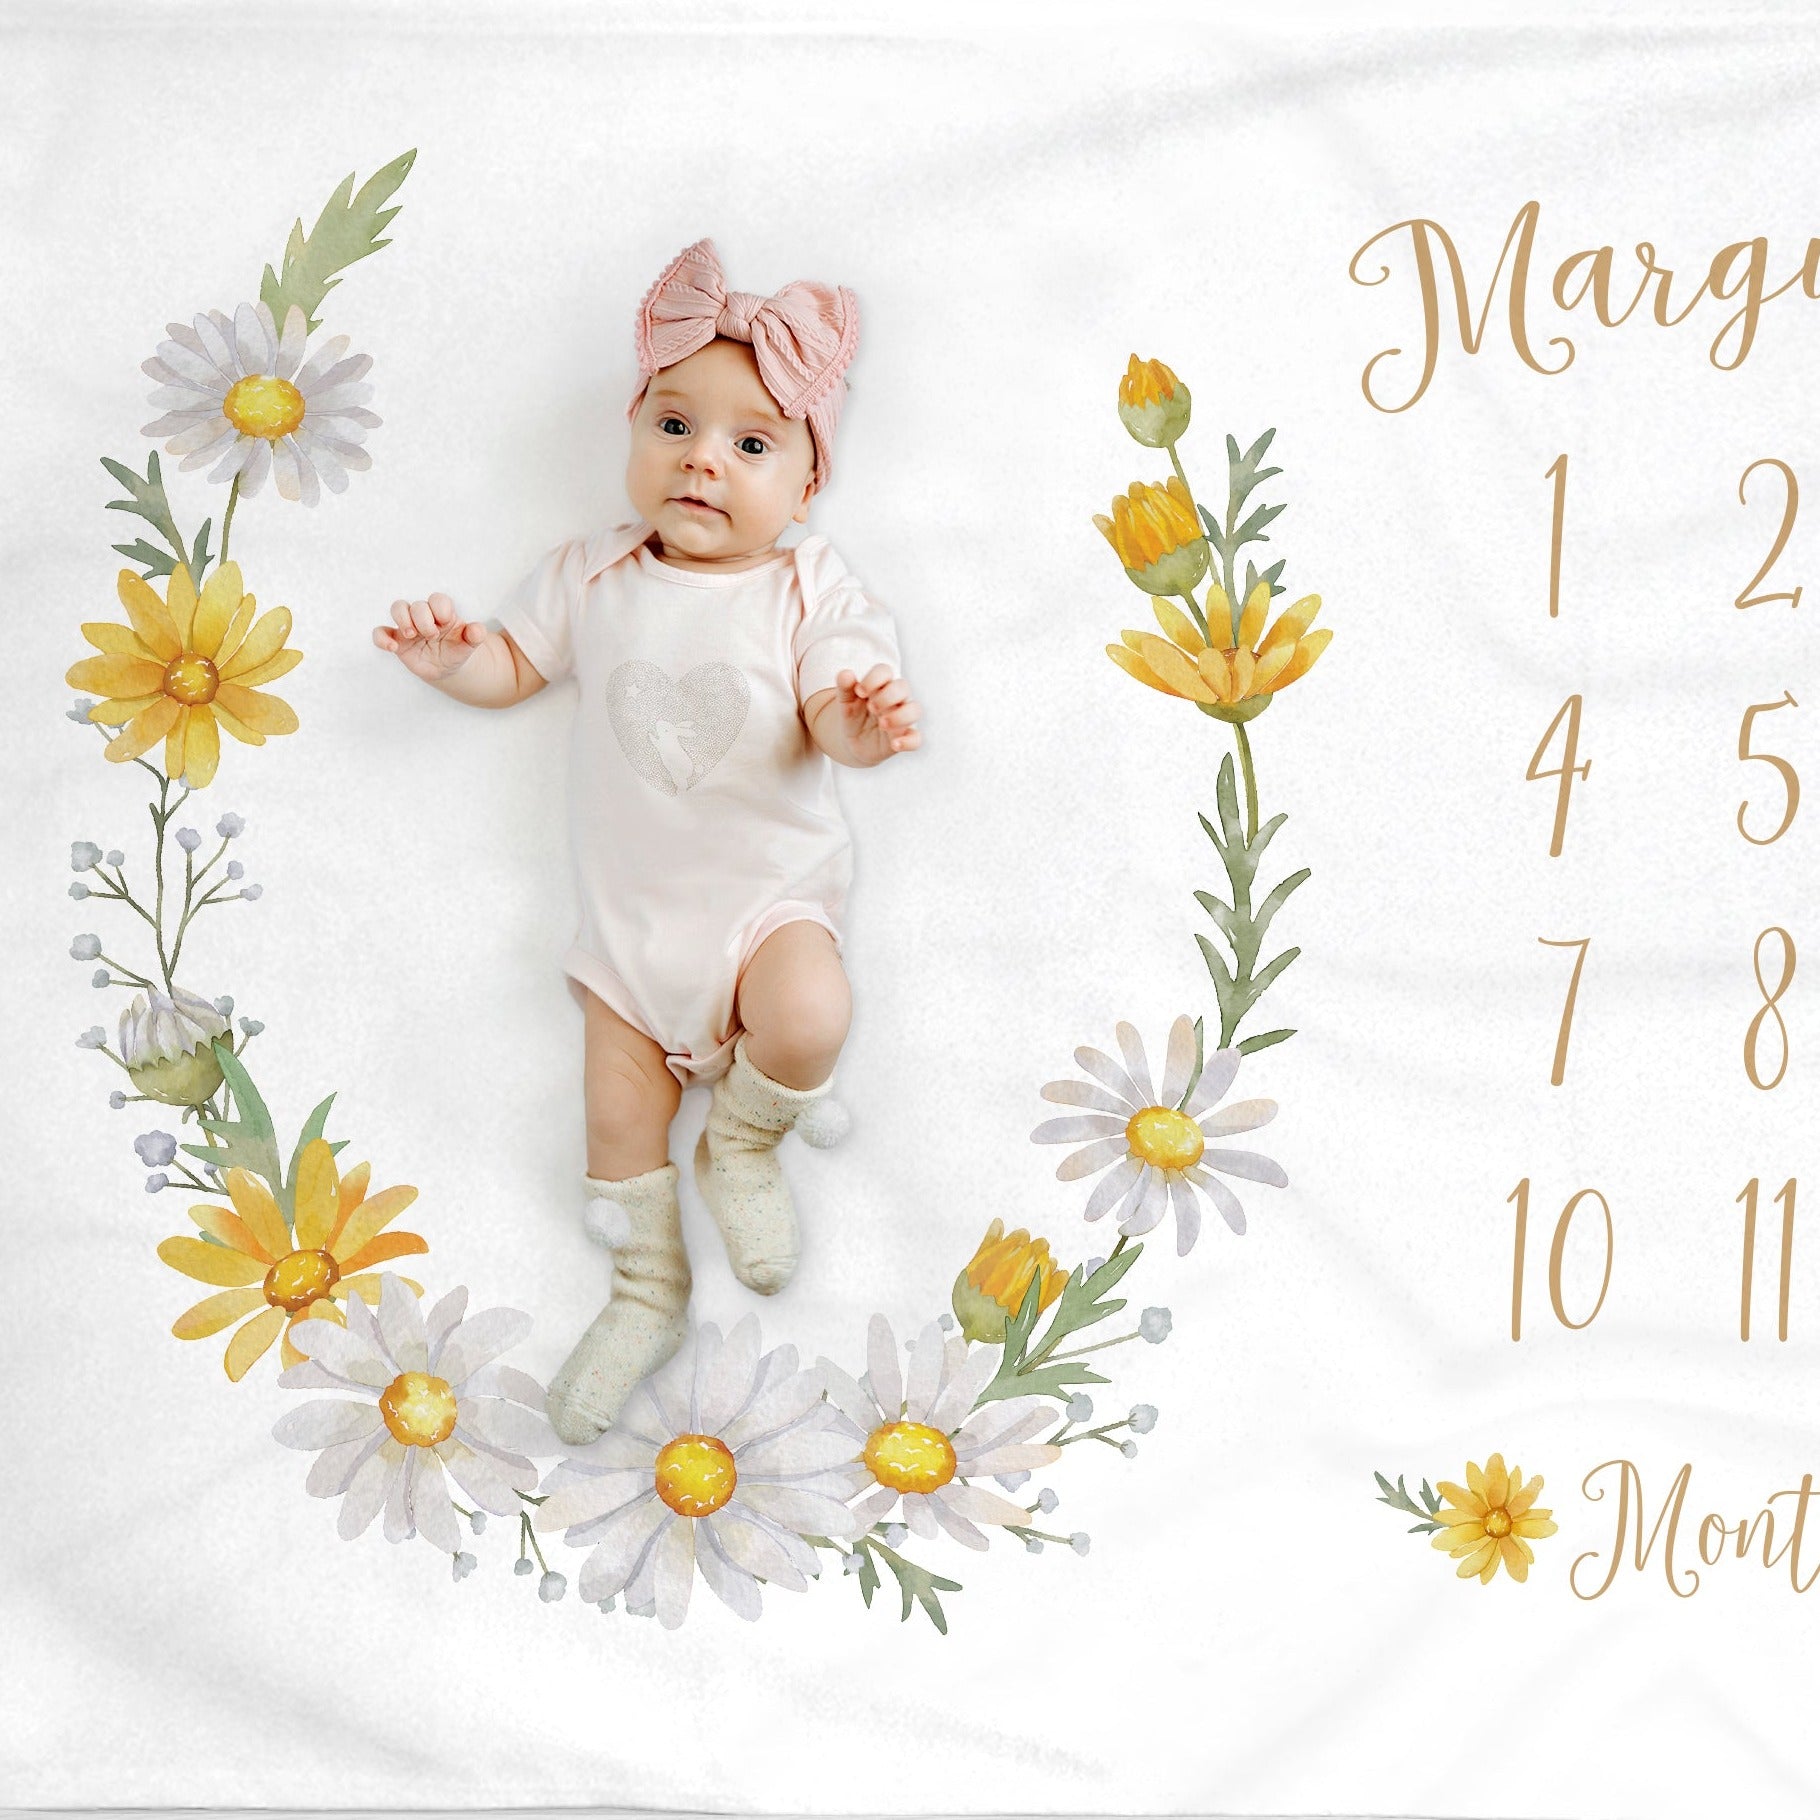 Daisy Milestone Baby Blanket, Track growth, baby girl floral, personalized